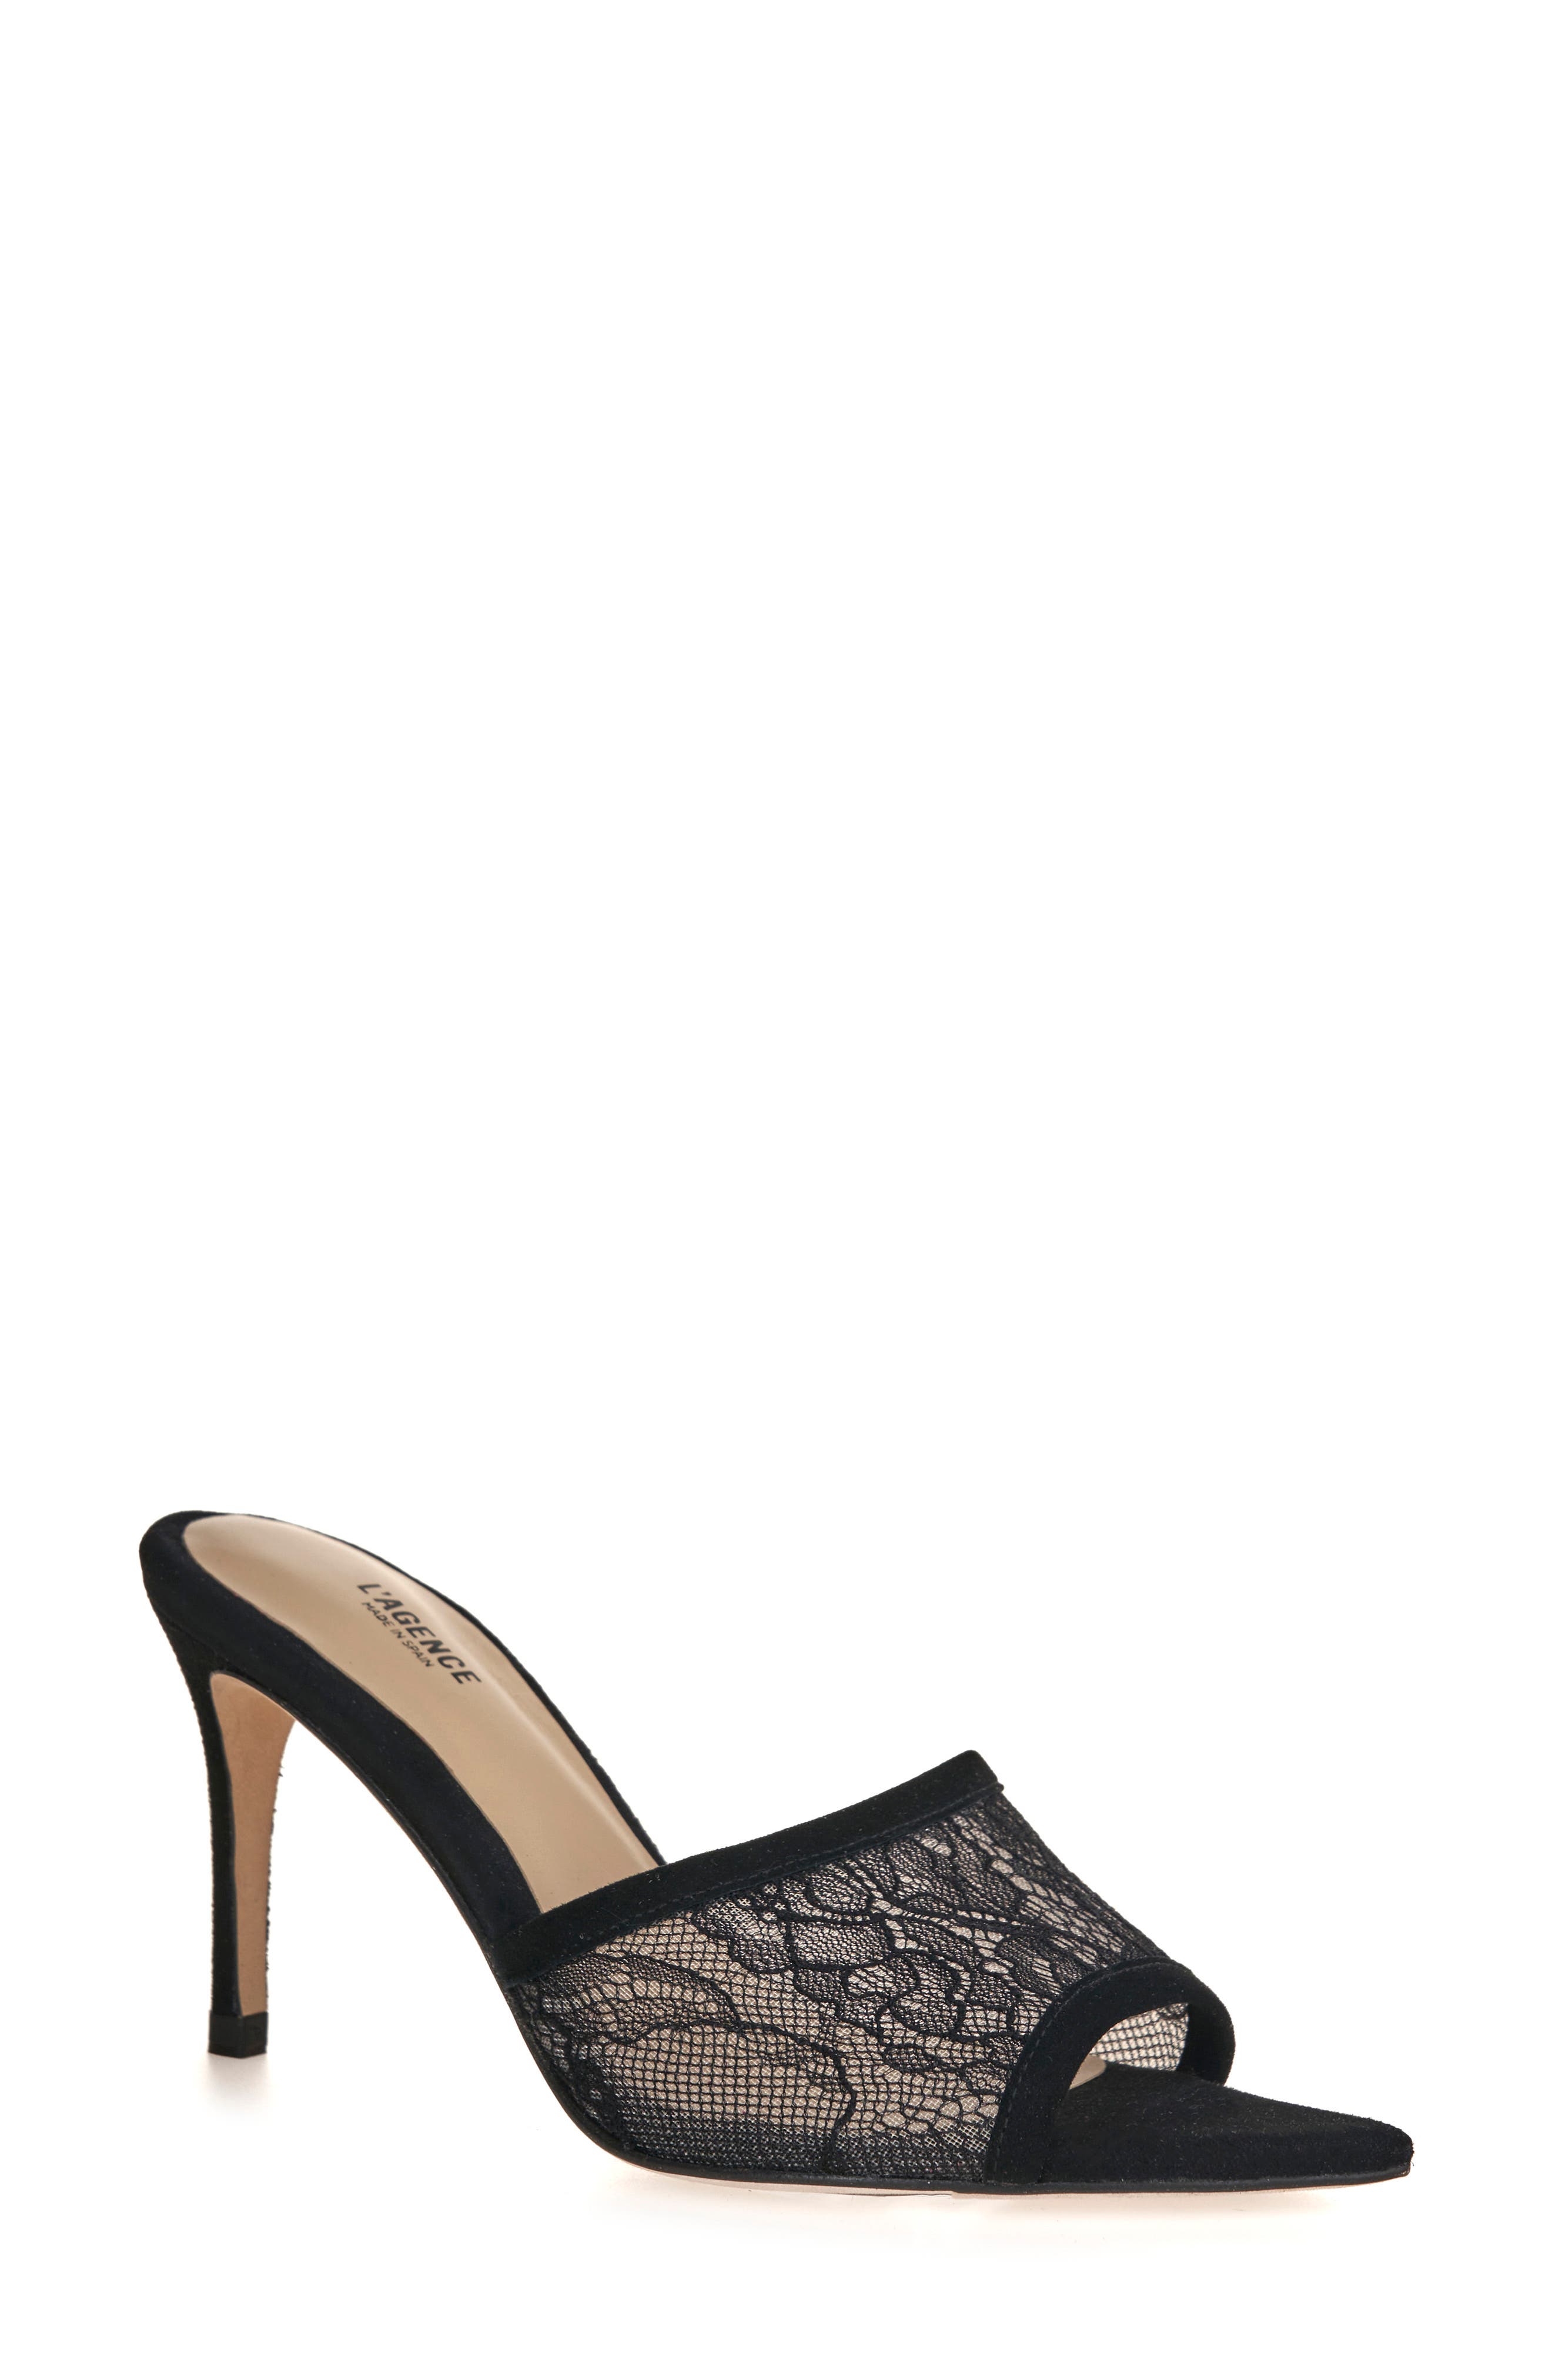 Giuseppe Zanotti Suede Mules With Chain Details in Black Womens Shoes Heels Mule shoes 